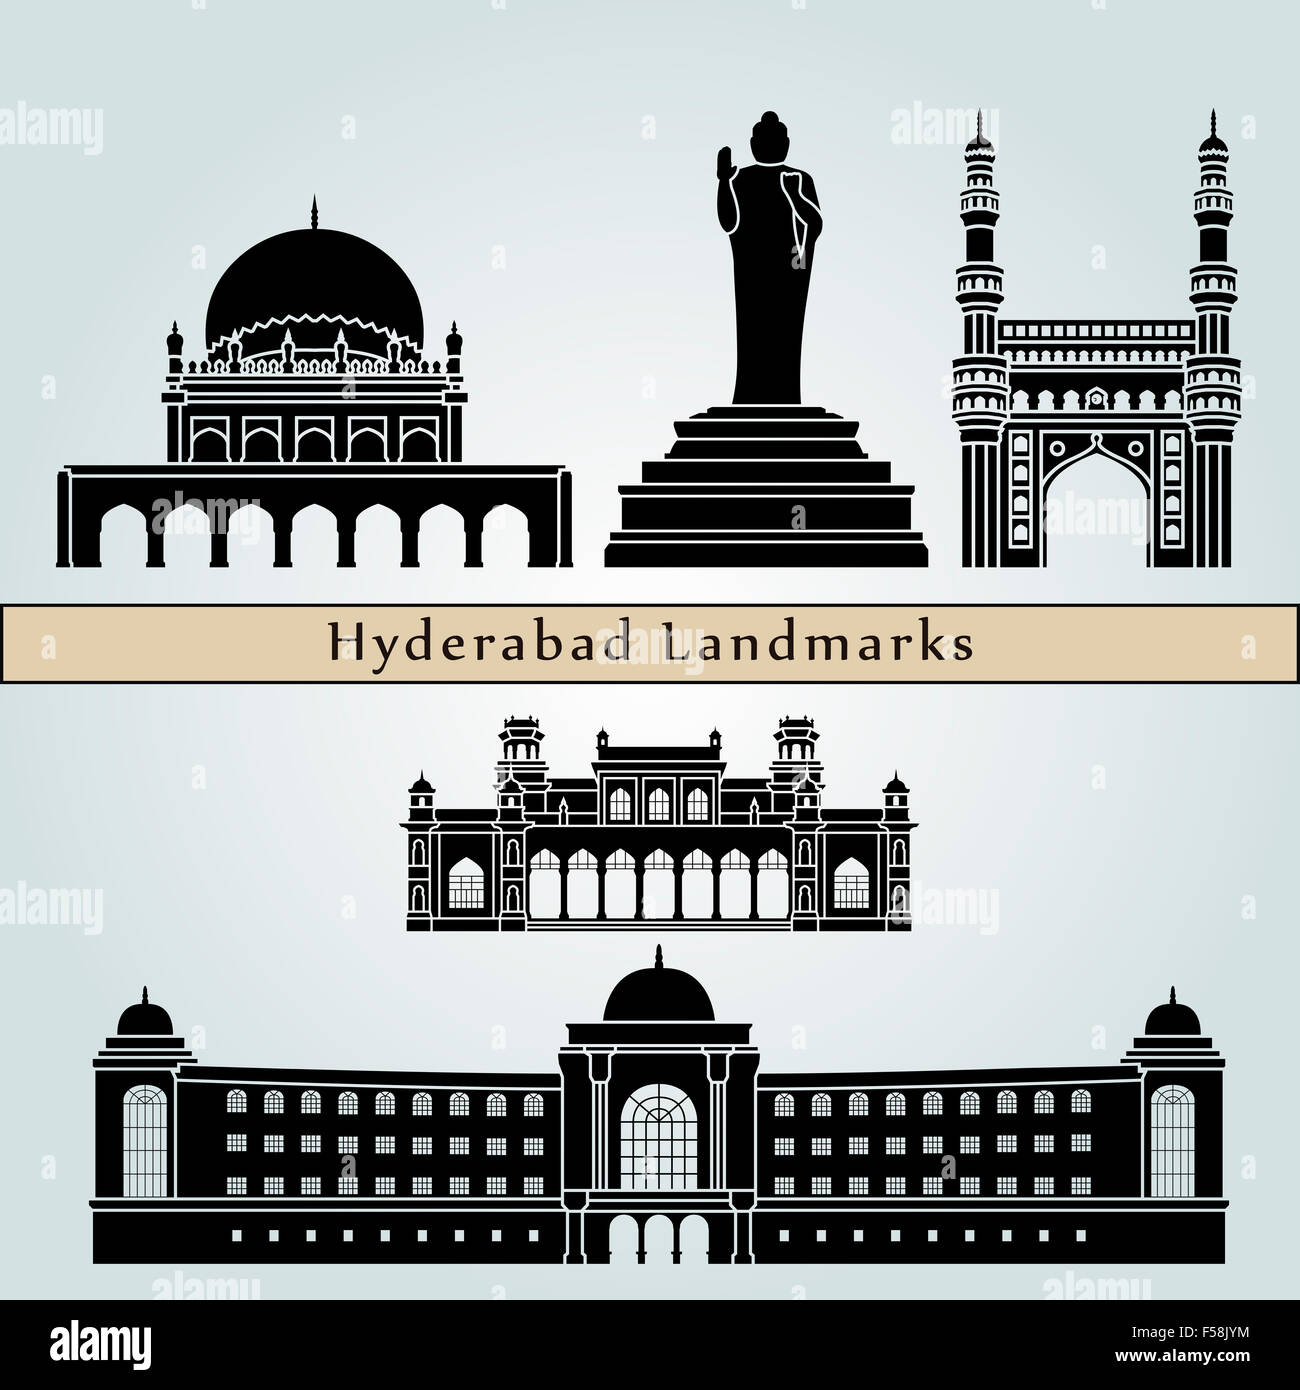 Hyderabad landmarks and monuments isolated on blue background in editable vector file Stock Photo